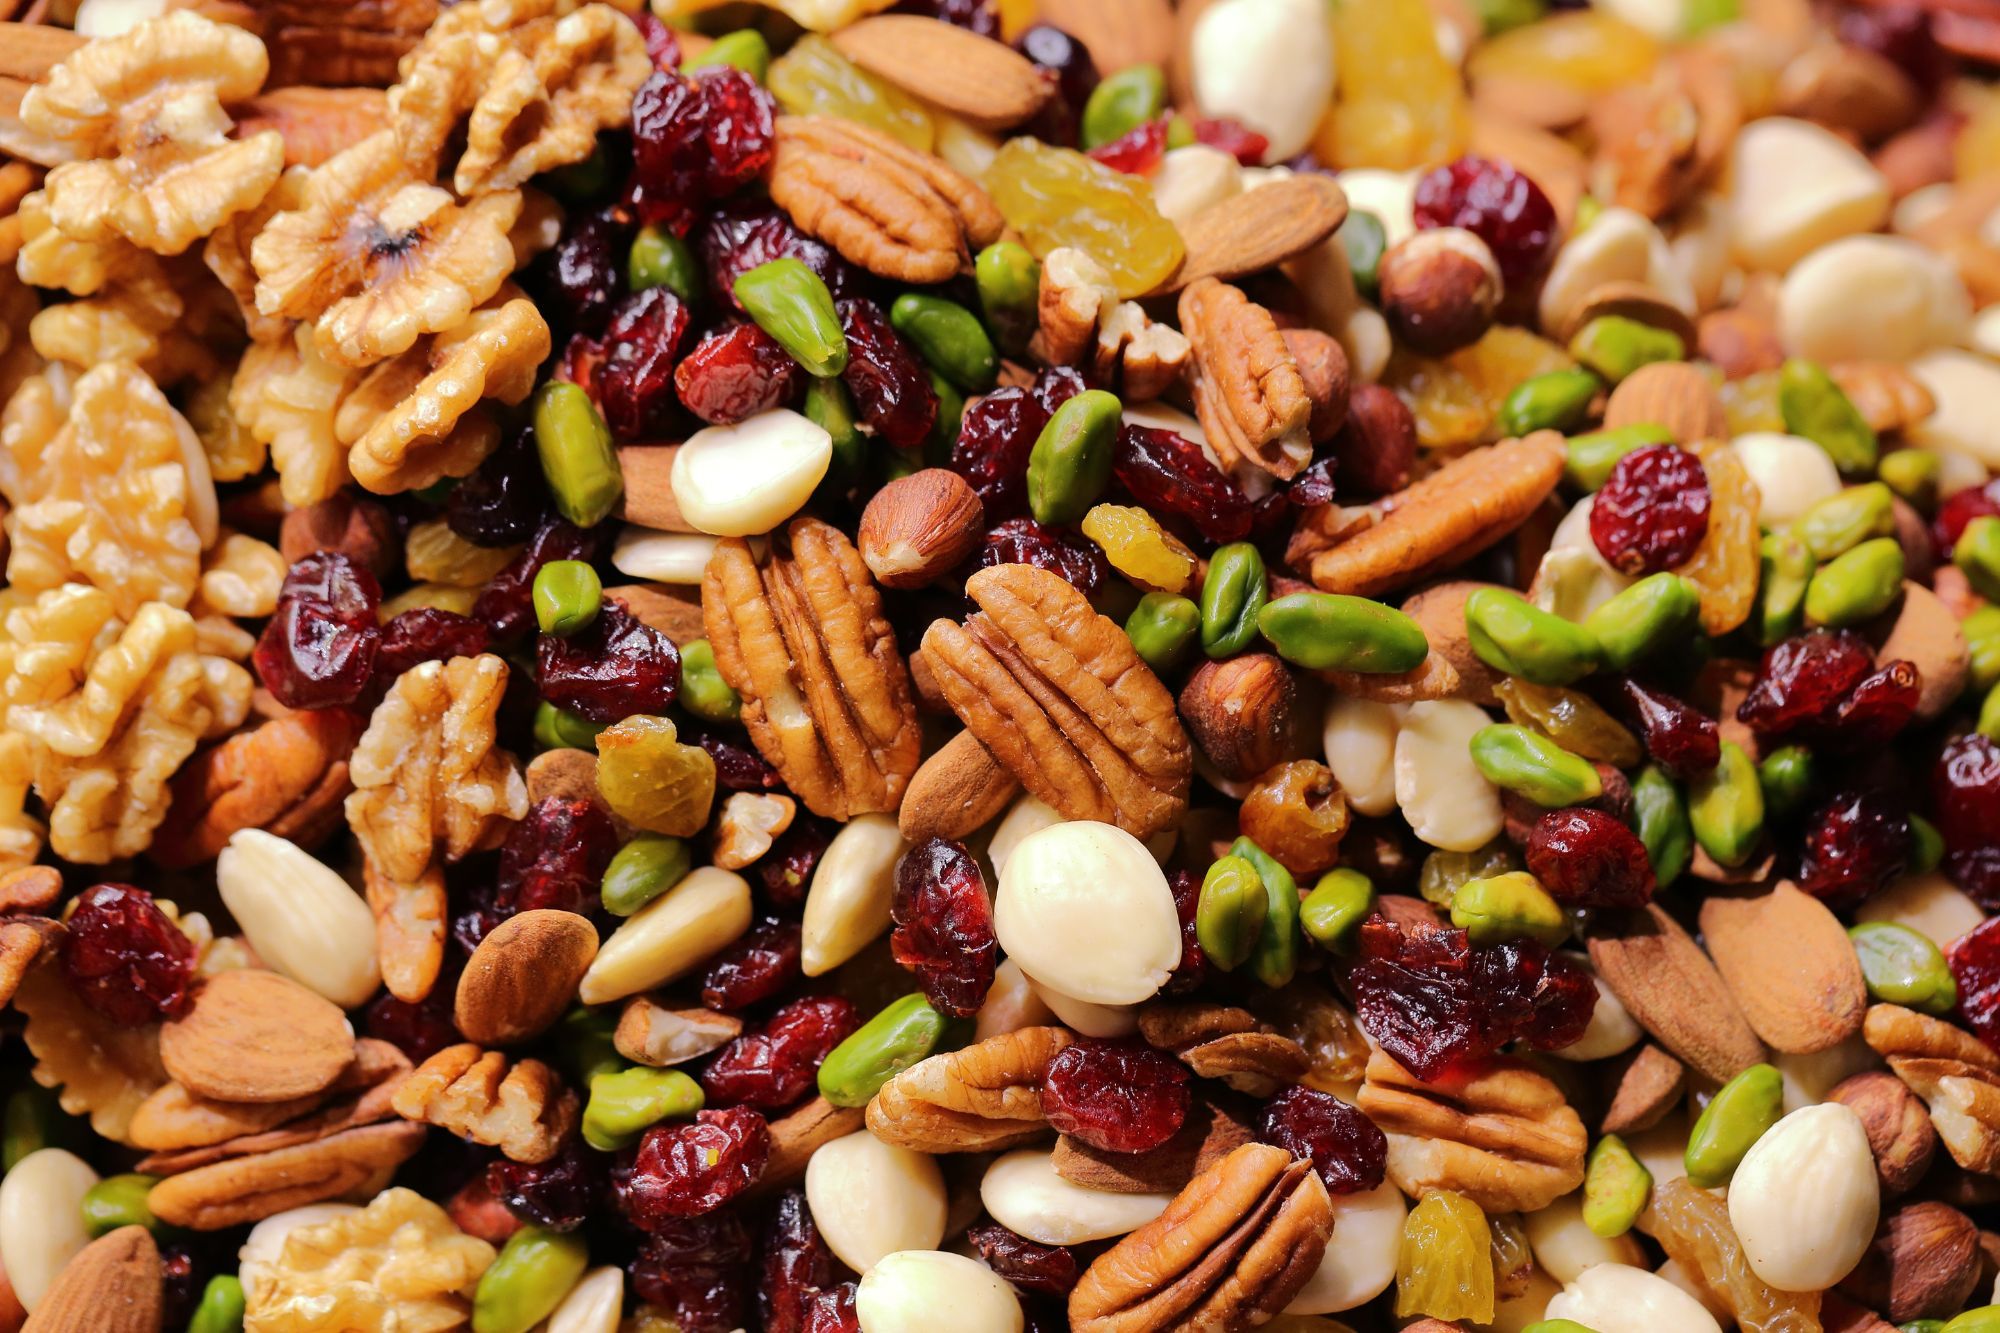 Nuts, seeds, and dried fruit